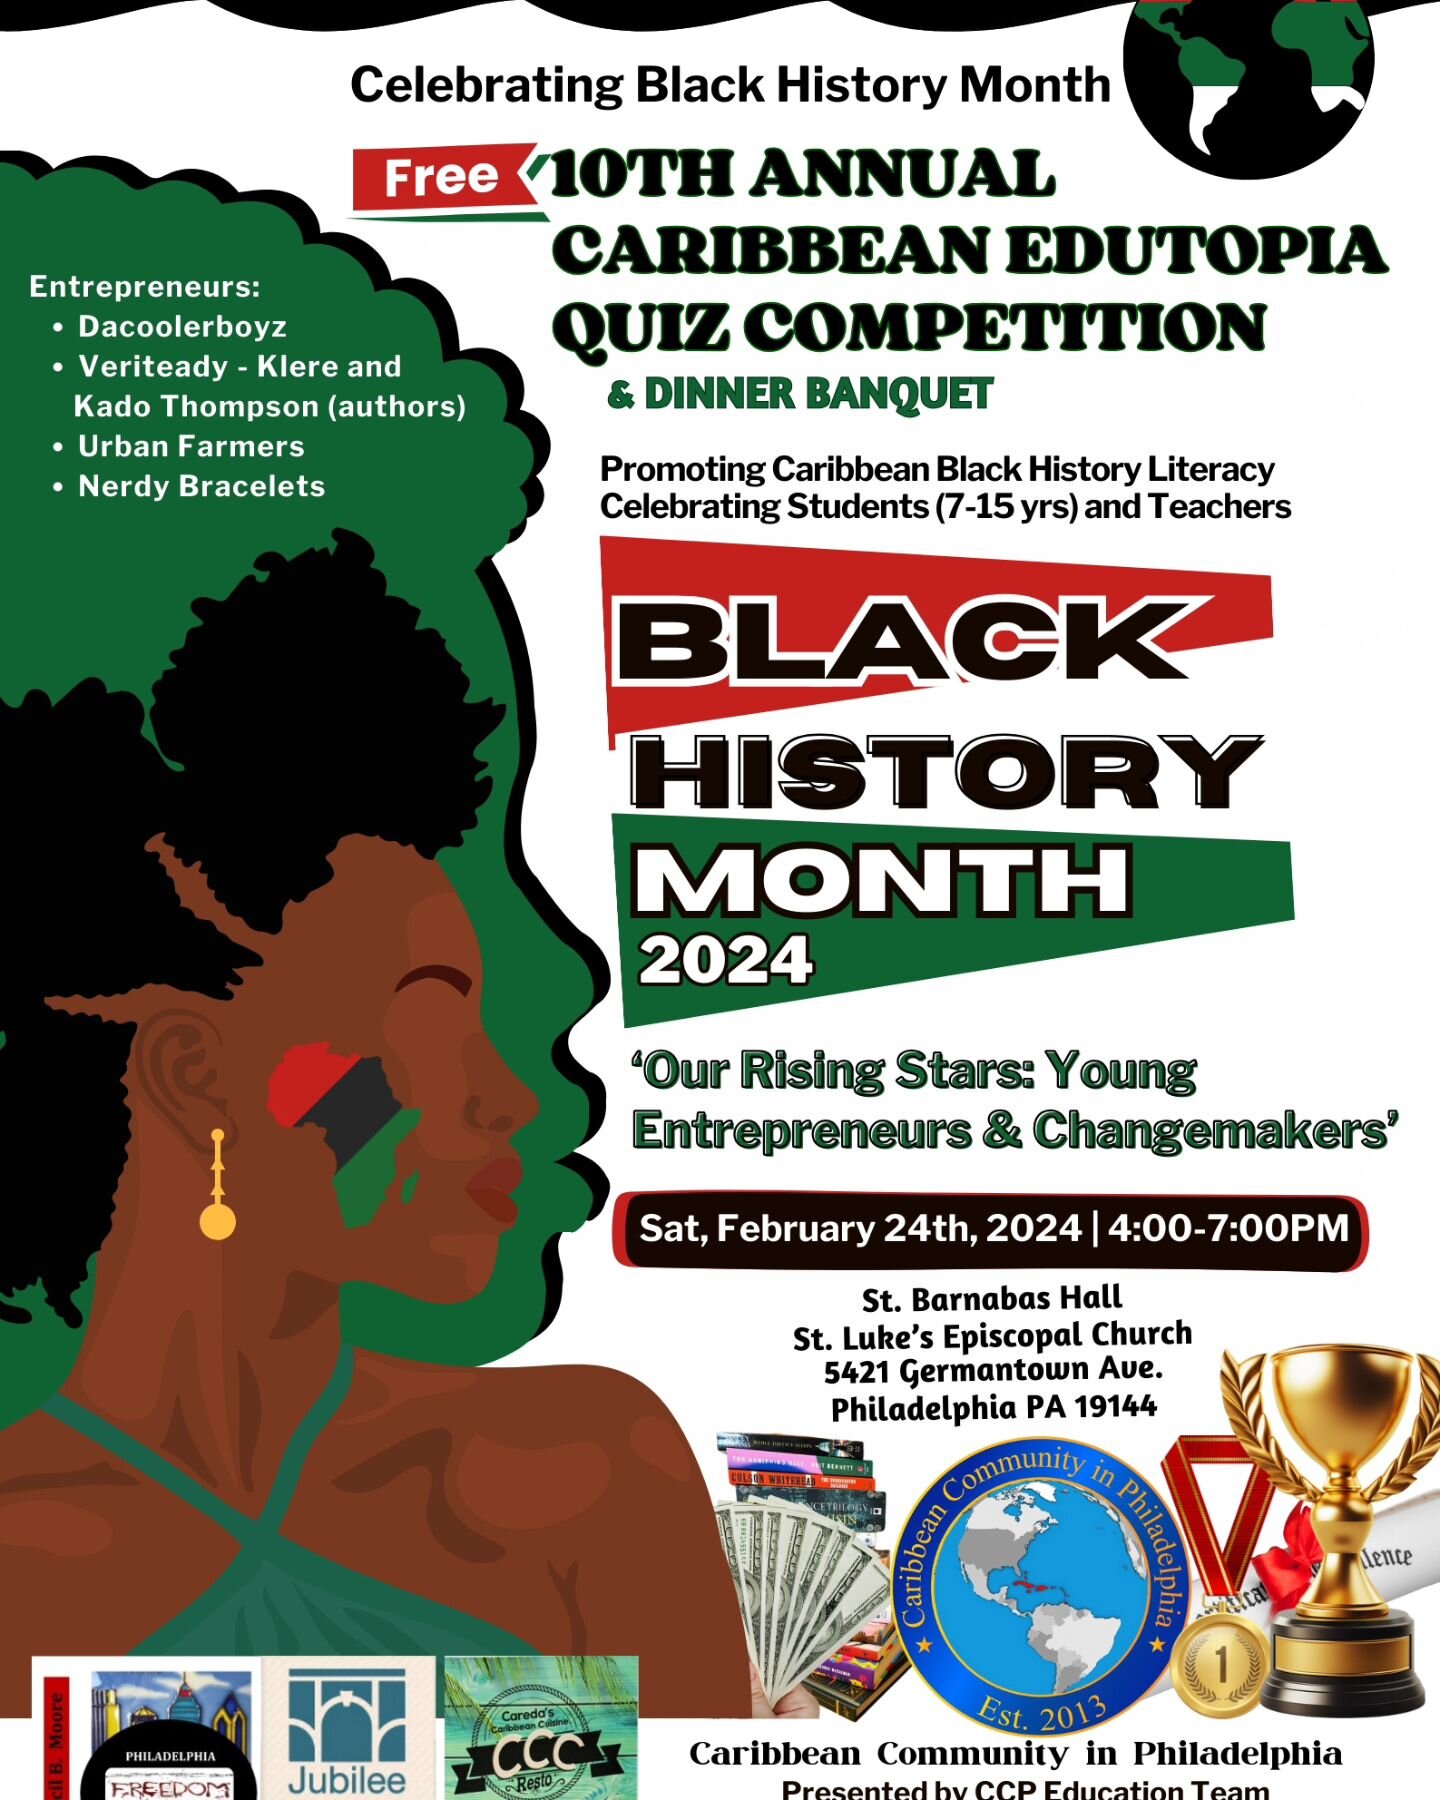 Support the Caribbean Community in Philadelphia!!! Free event!! #philly #caribbeancommunity #Caribbean